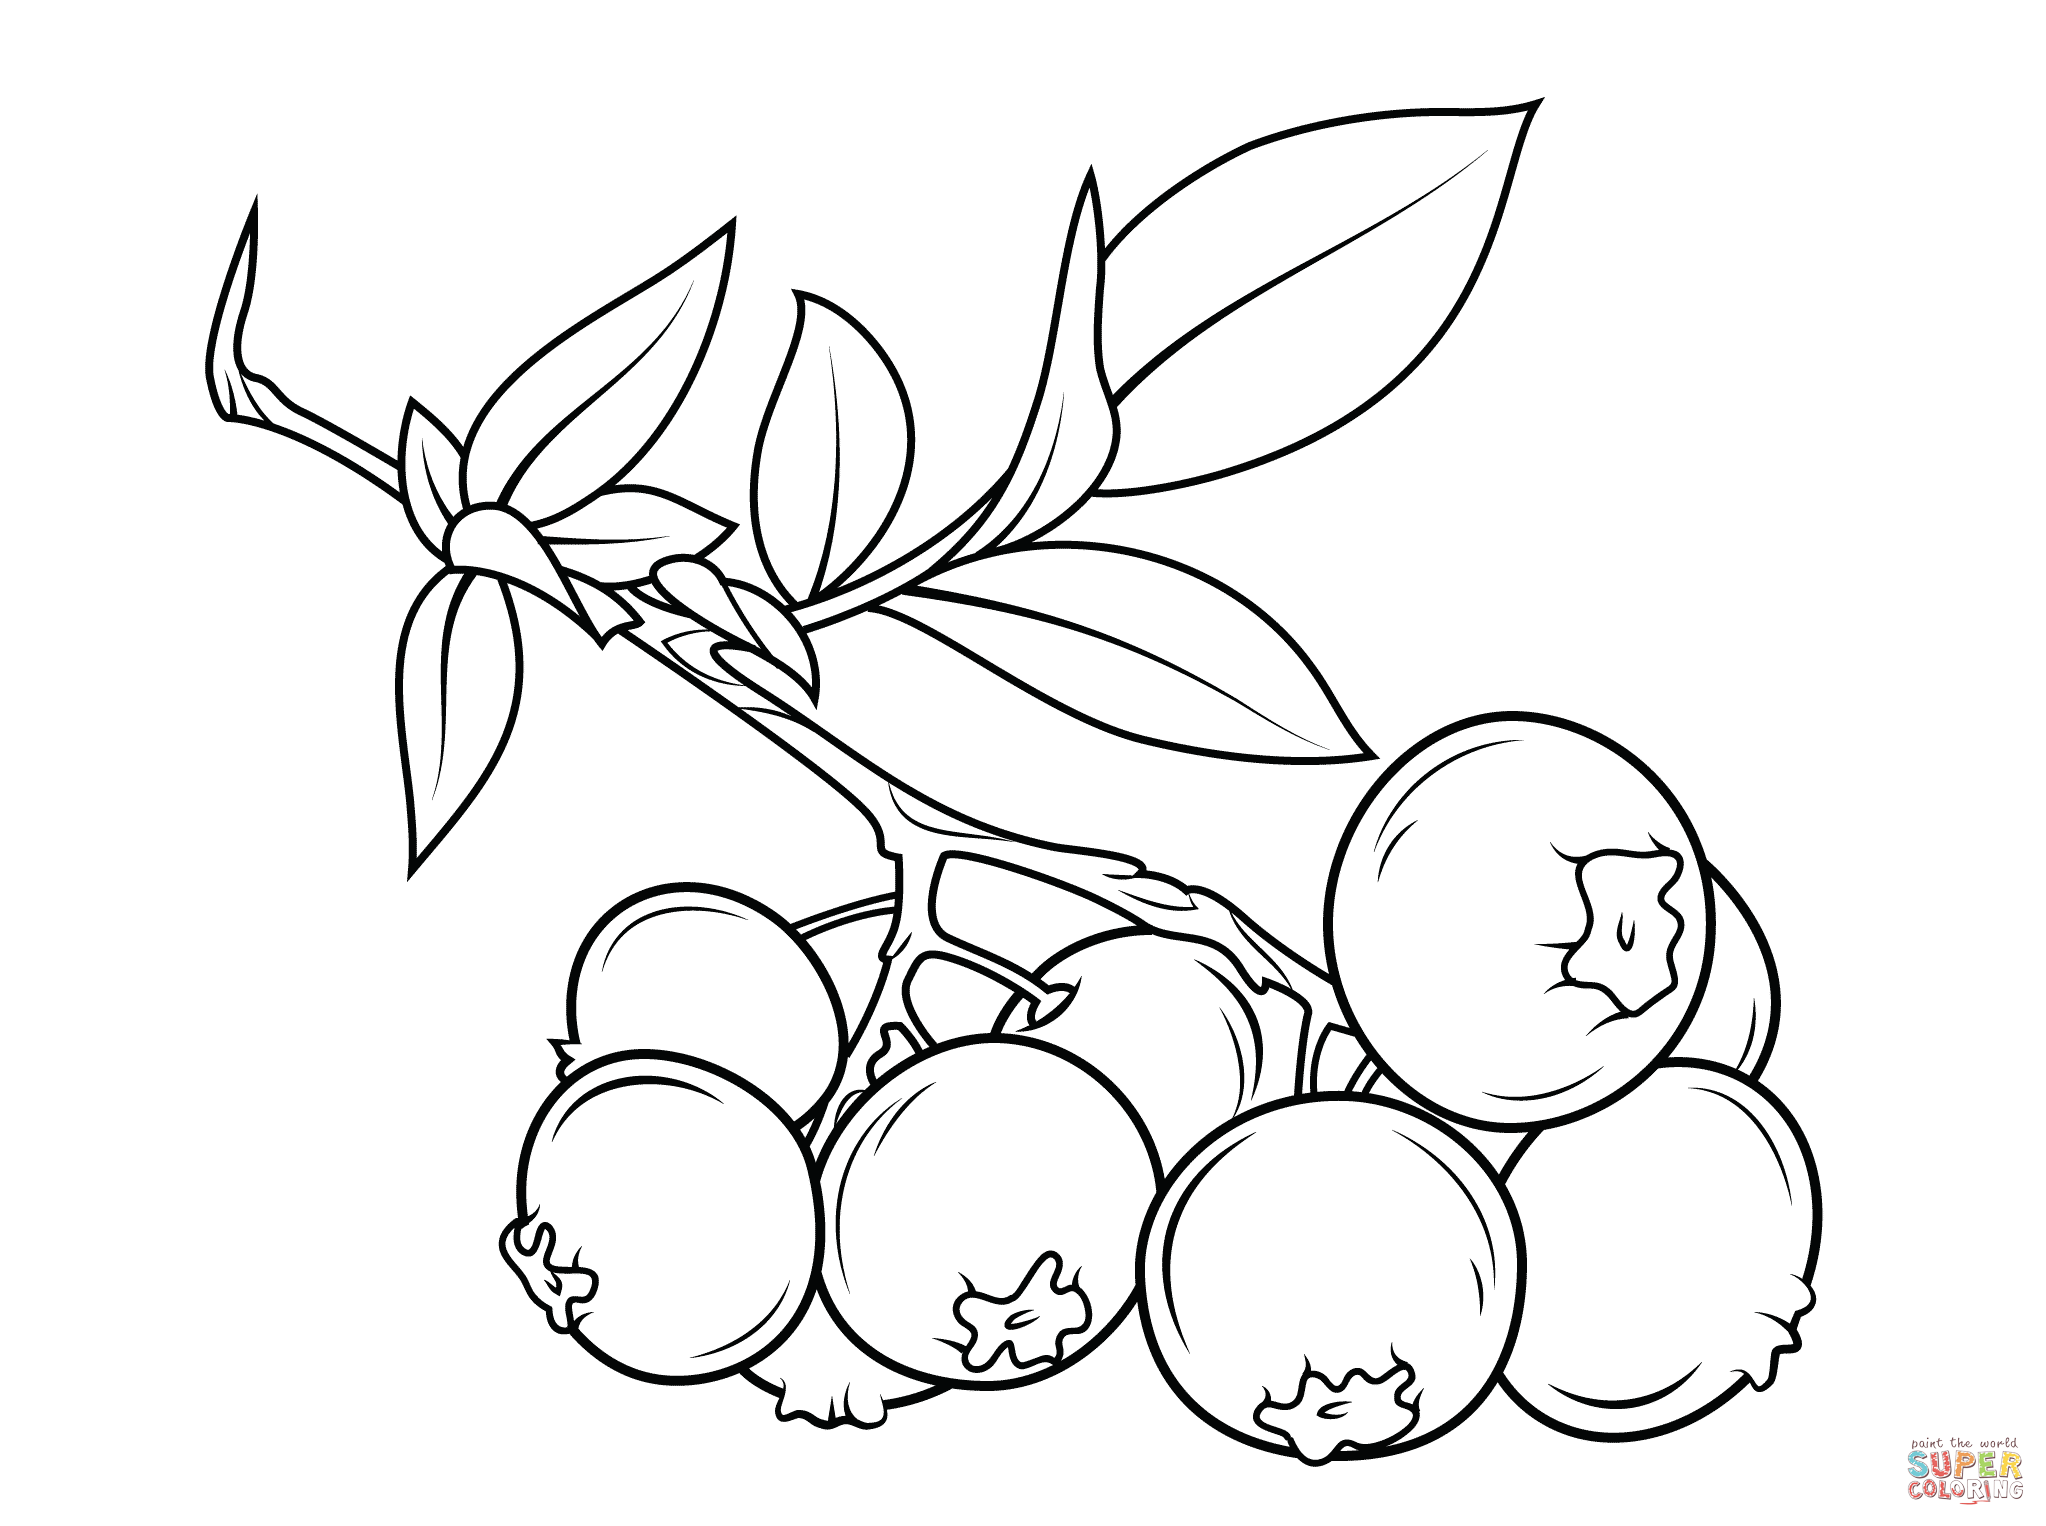 Blueberry branch coloring page | Free Printable Coloring Pages